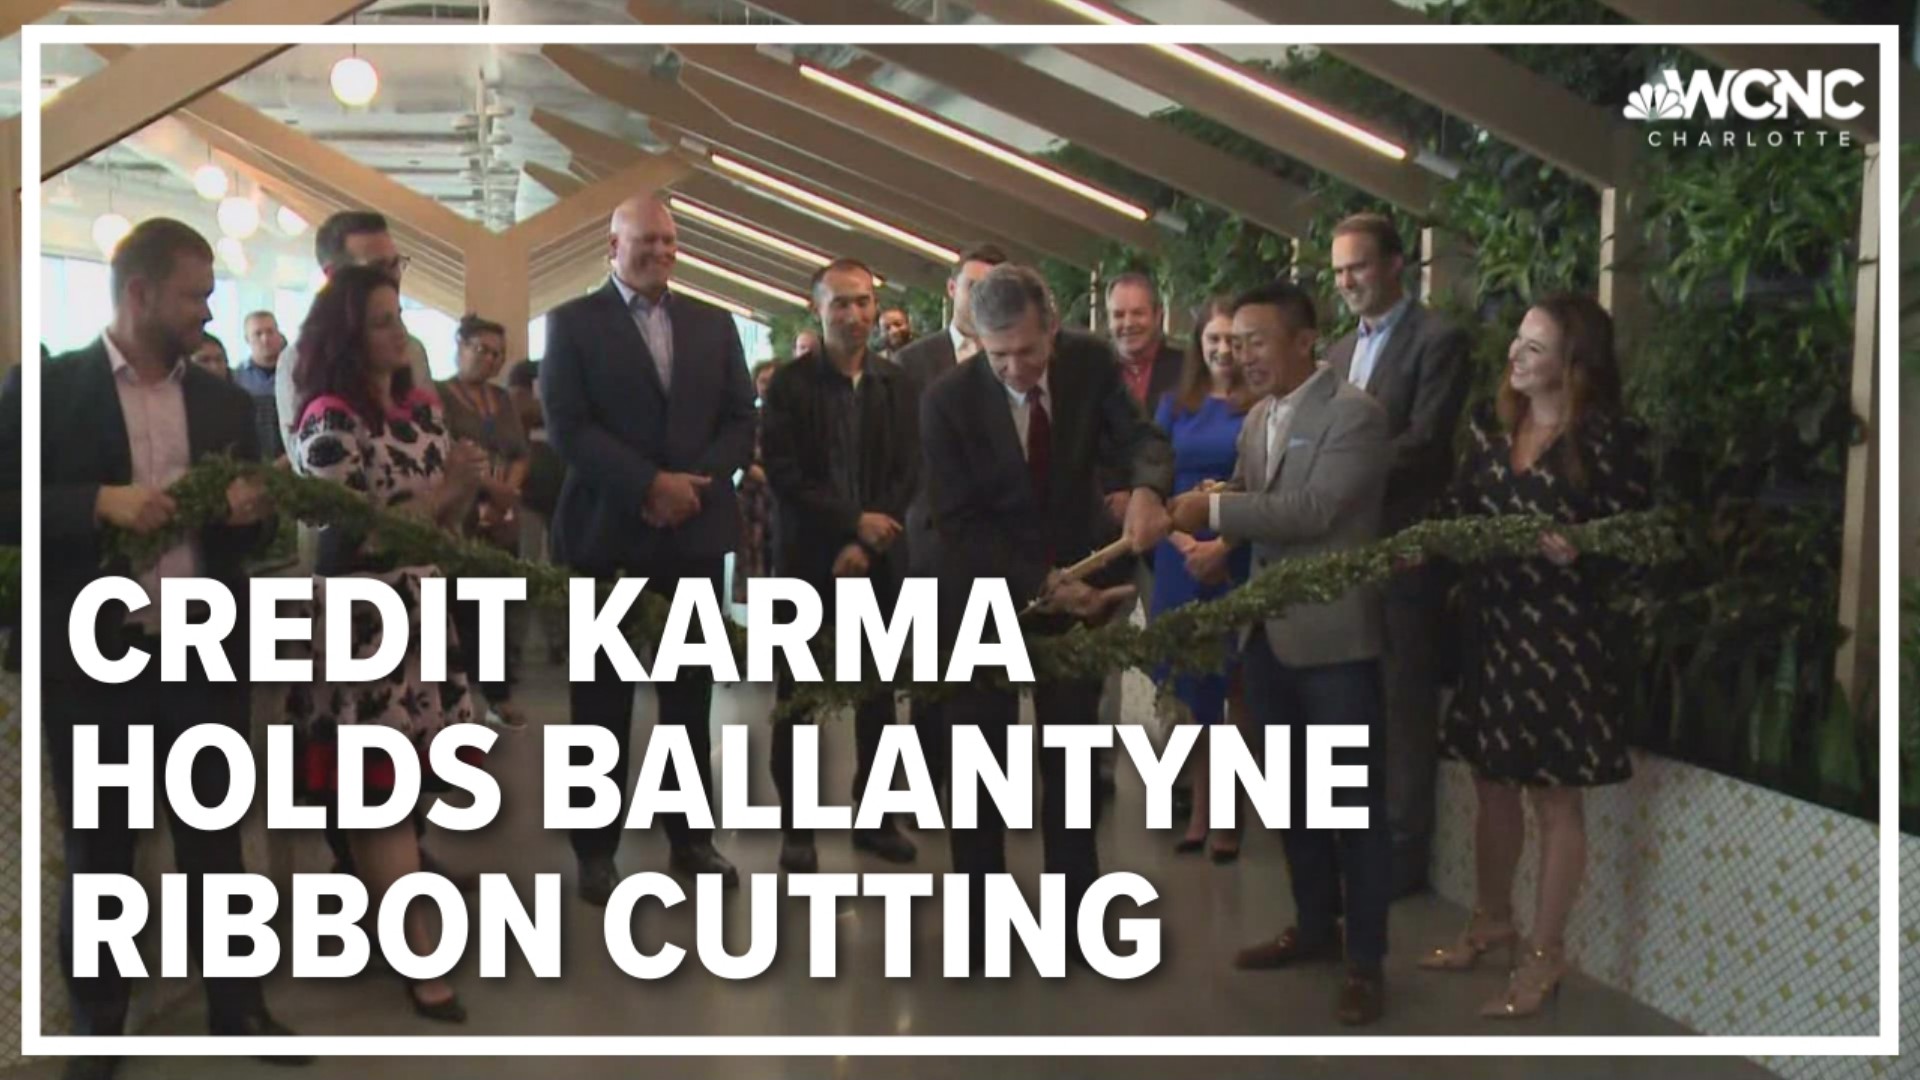 Credit Karma is investing $13 million and expects to hire more than 600 employees in Charlotte in the coming years. Gov. Cooper was on hand for the ribbon cutting.